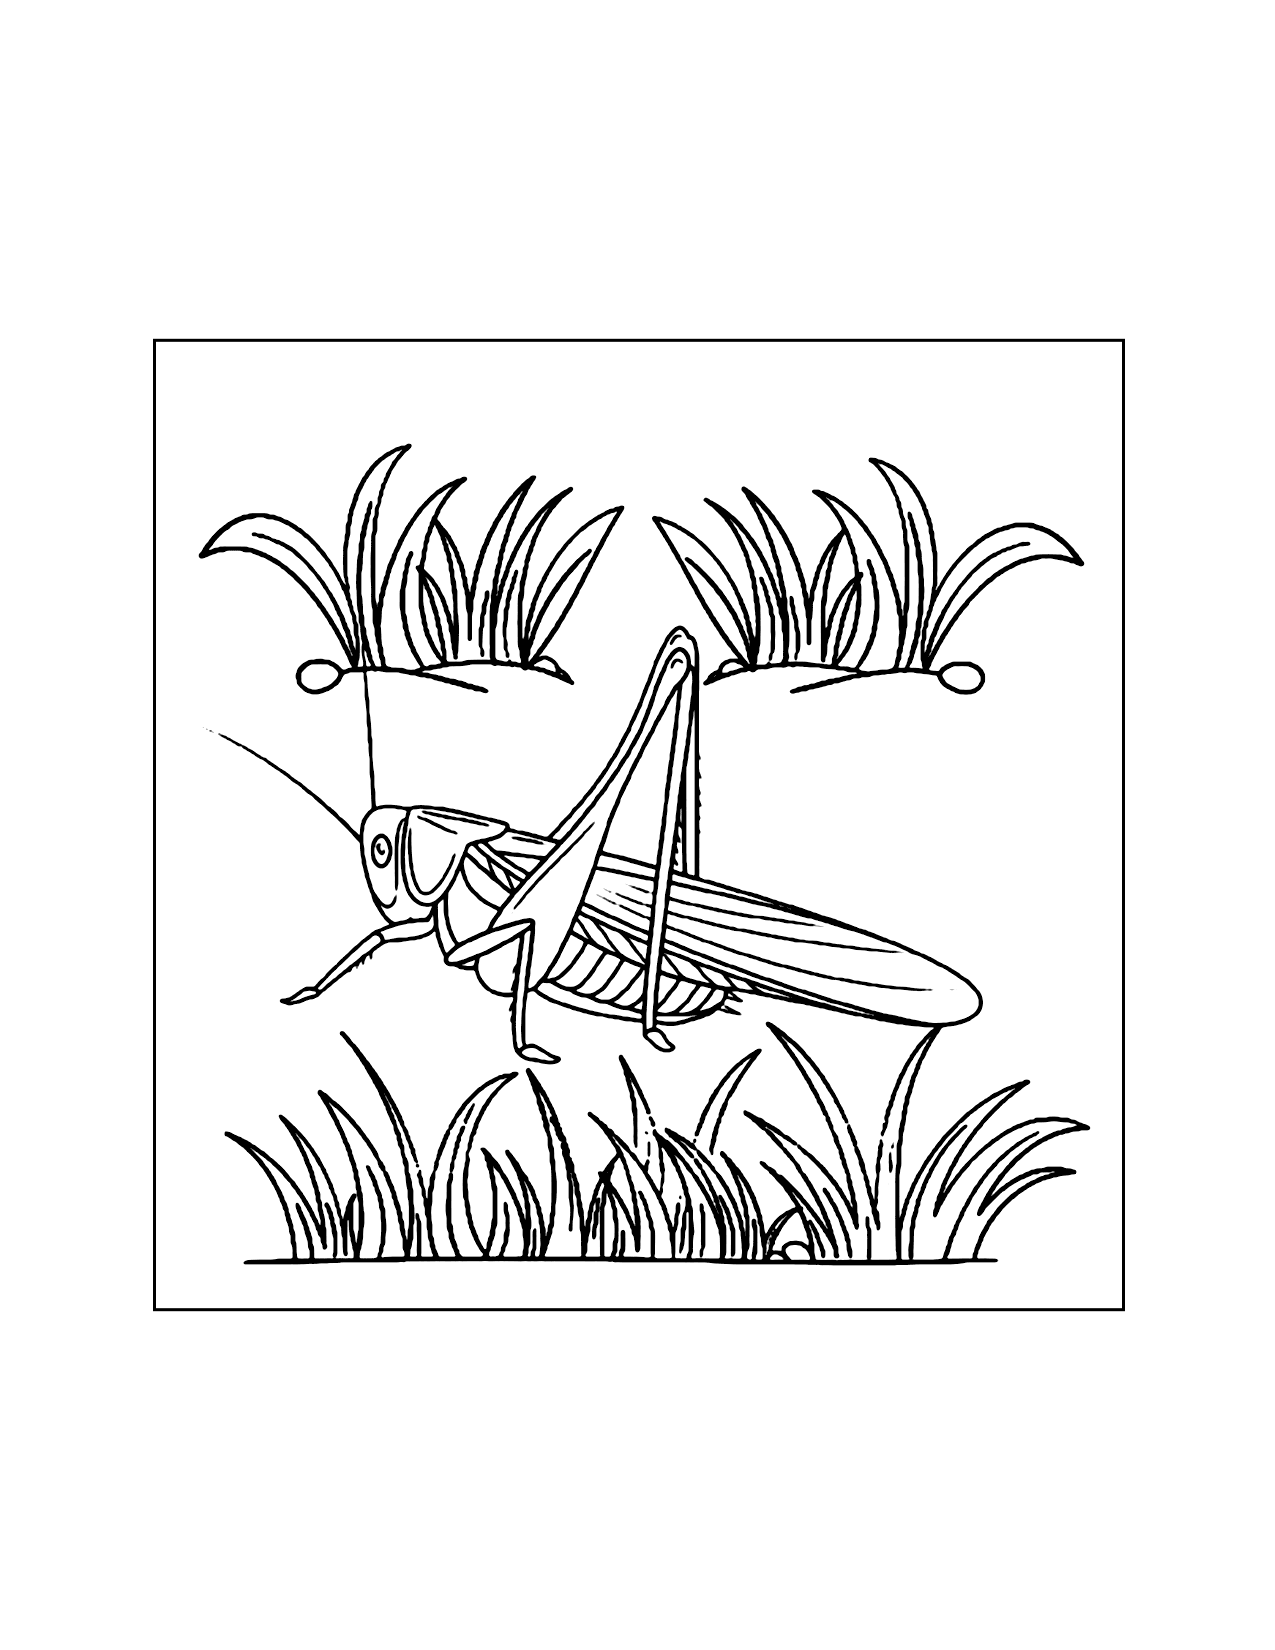 Cricket In The Grass Coloring Page